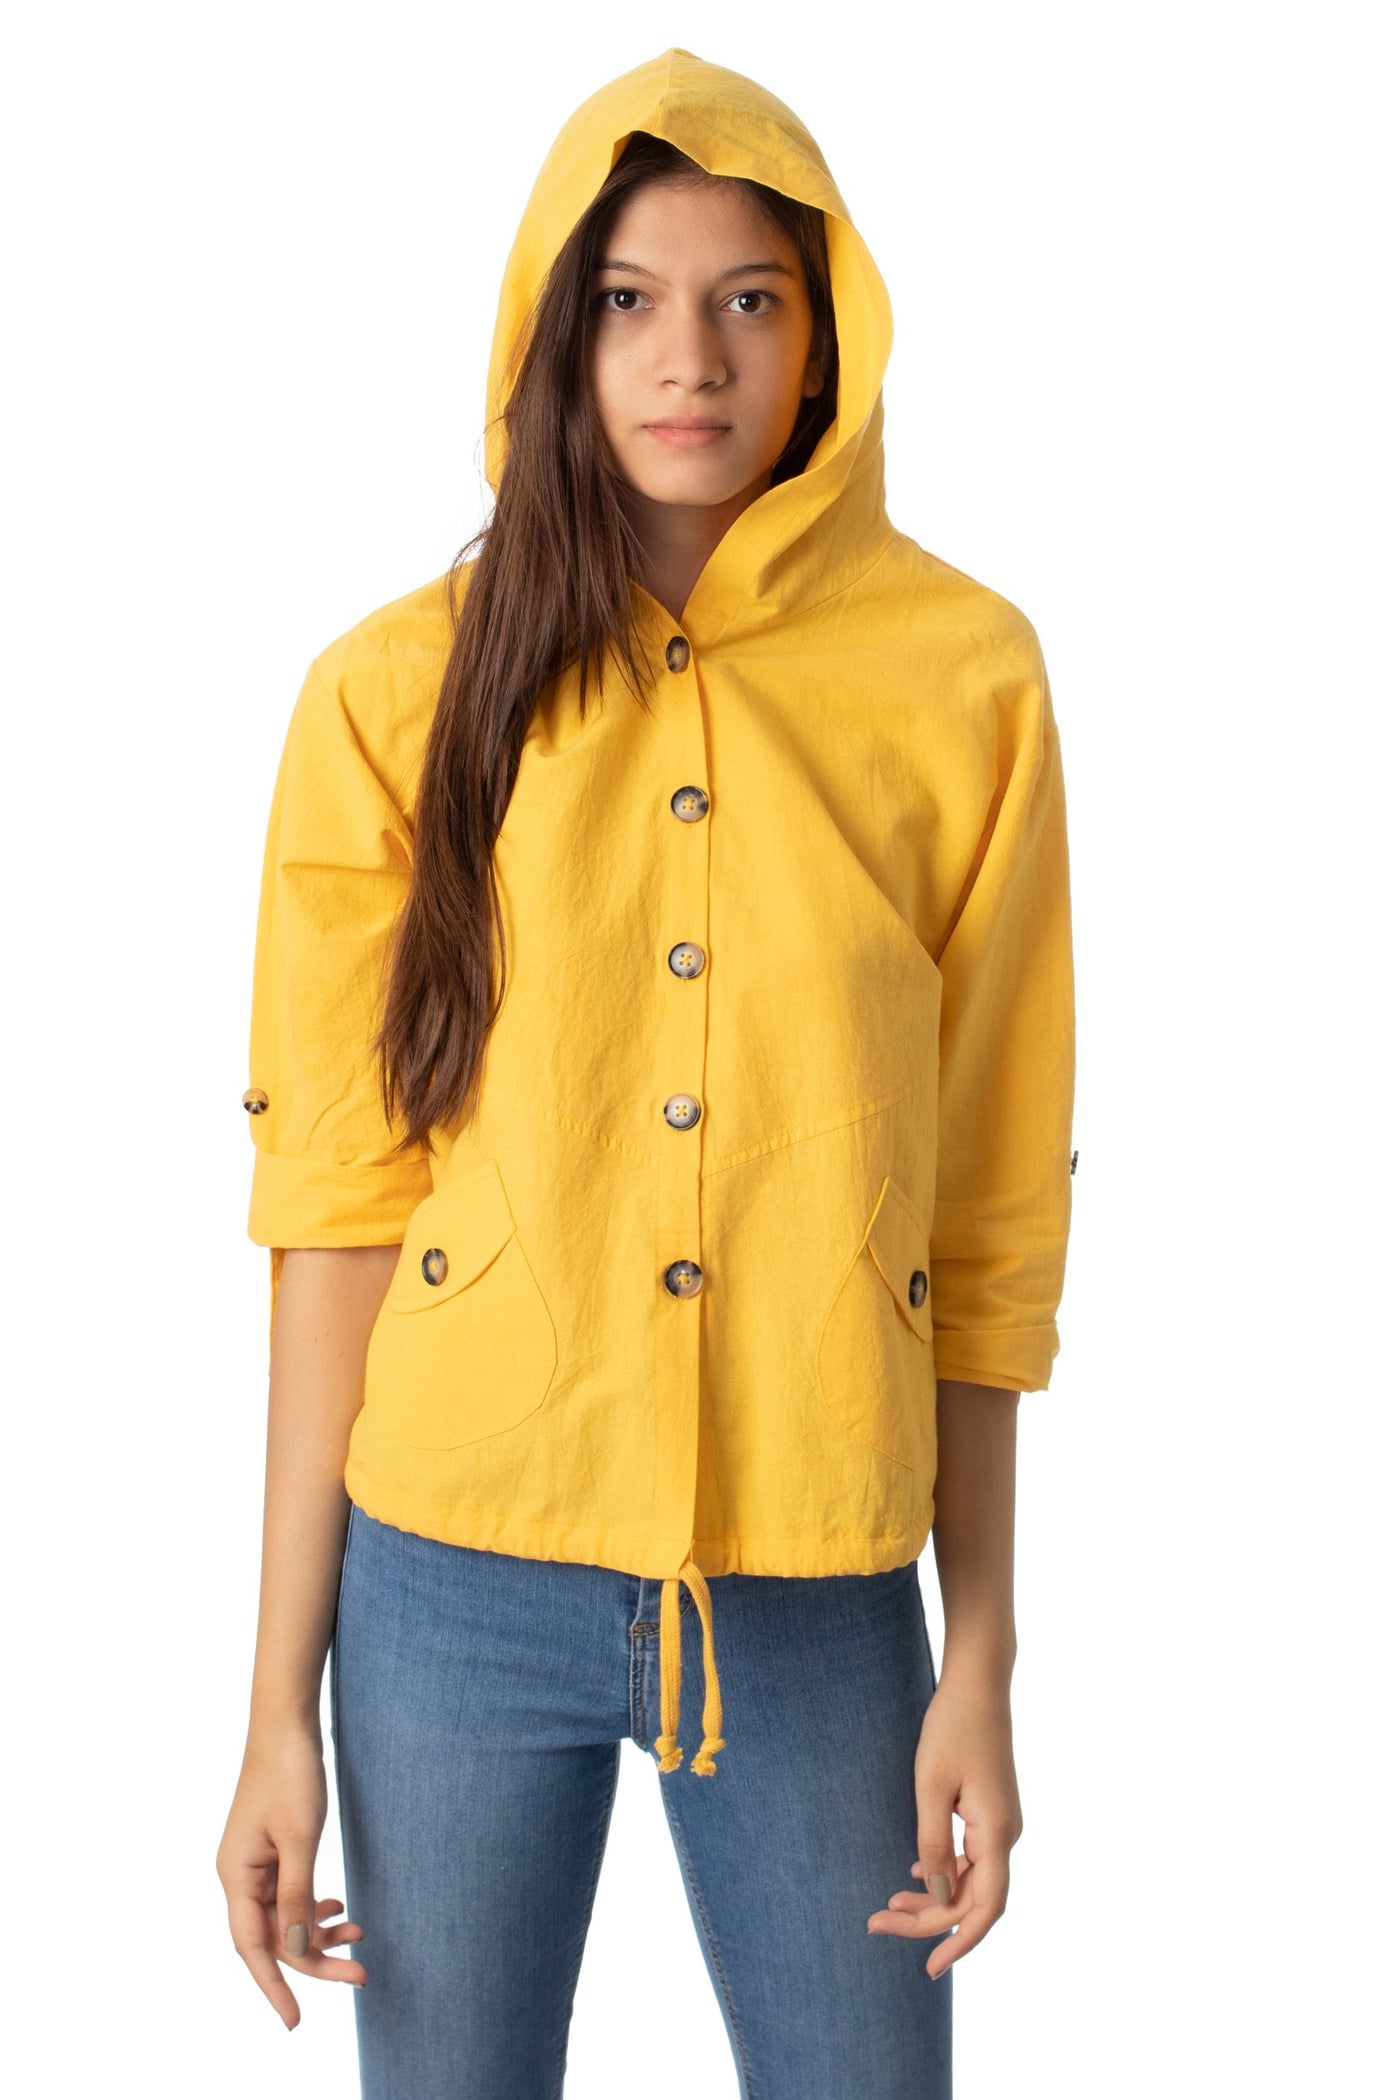 chassca shirt jacket with hood - Breakmood